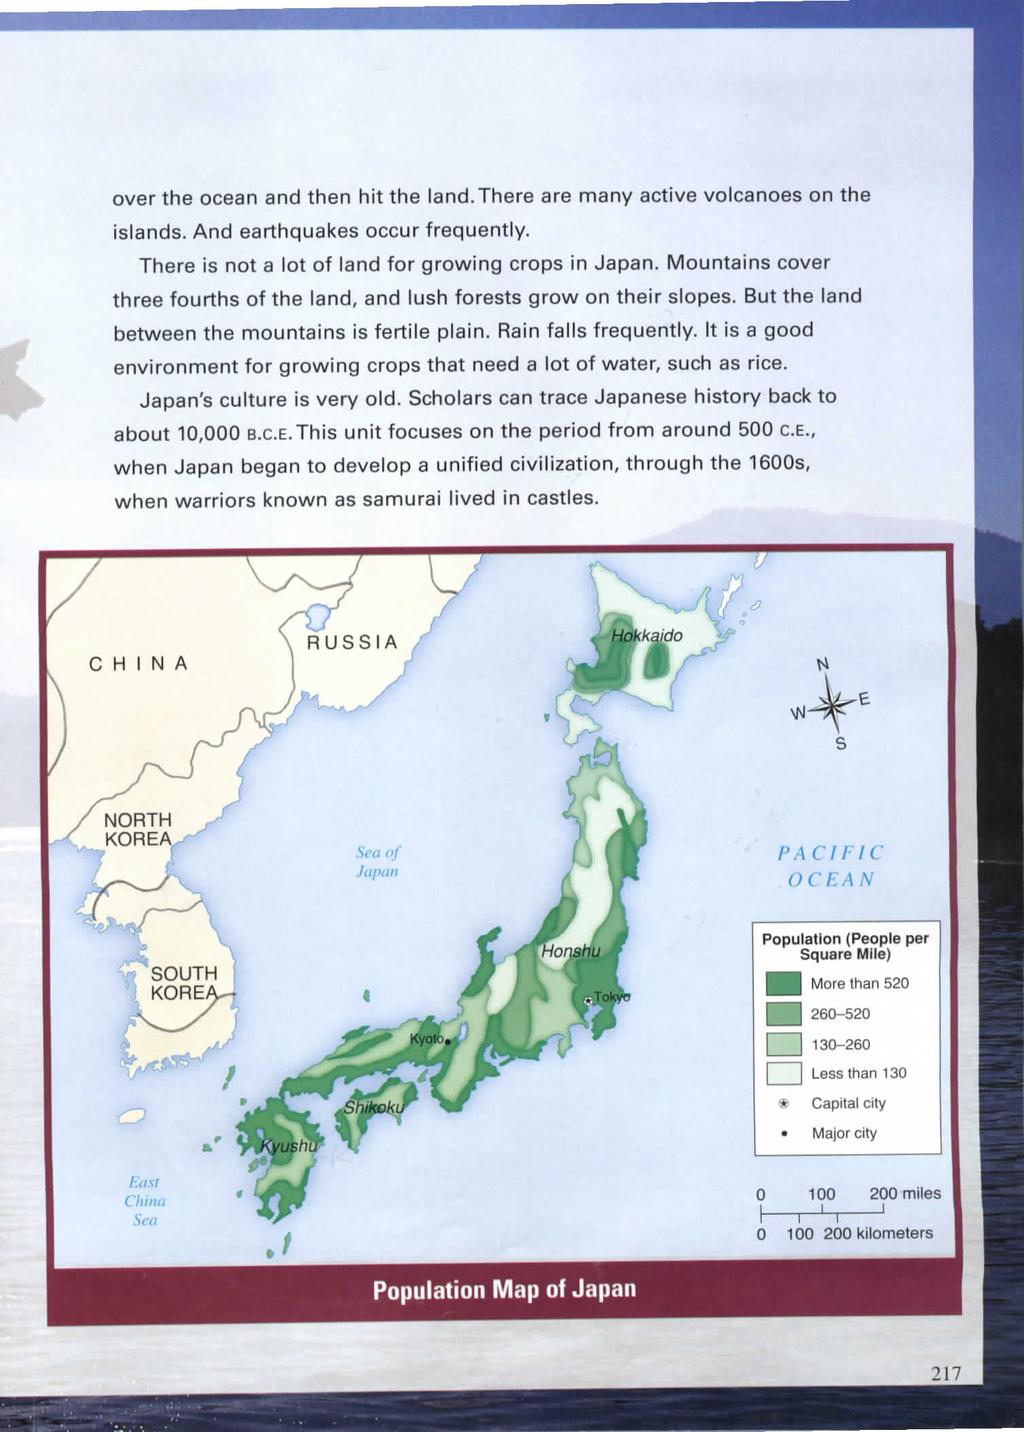 over the ocean and then hit the land.there are many active volcanoes on the islands. And earthquakes occur frequently. There is not a lot of land for growing crops in Japan.